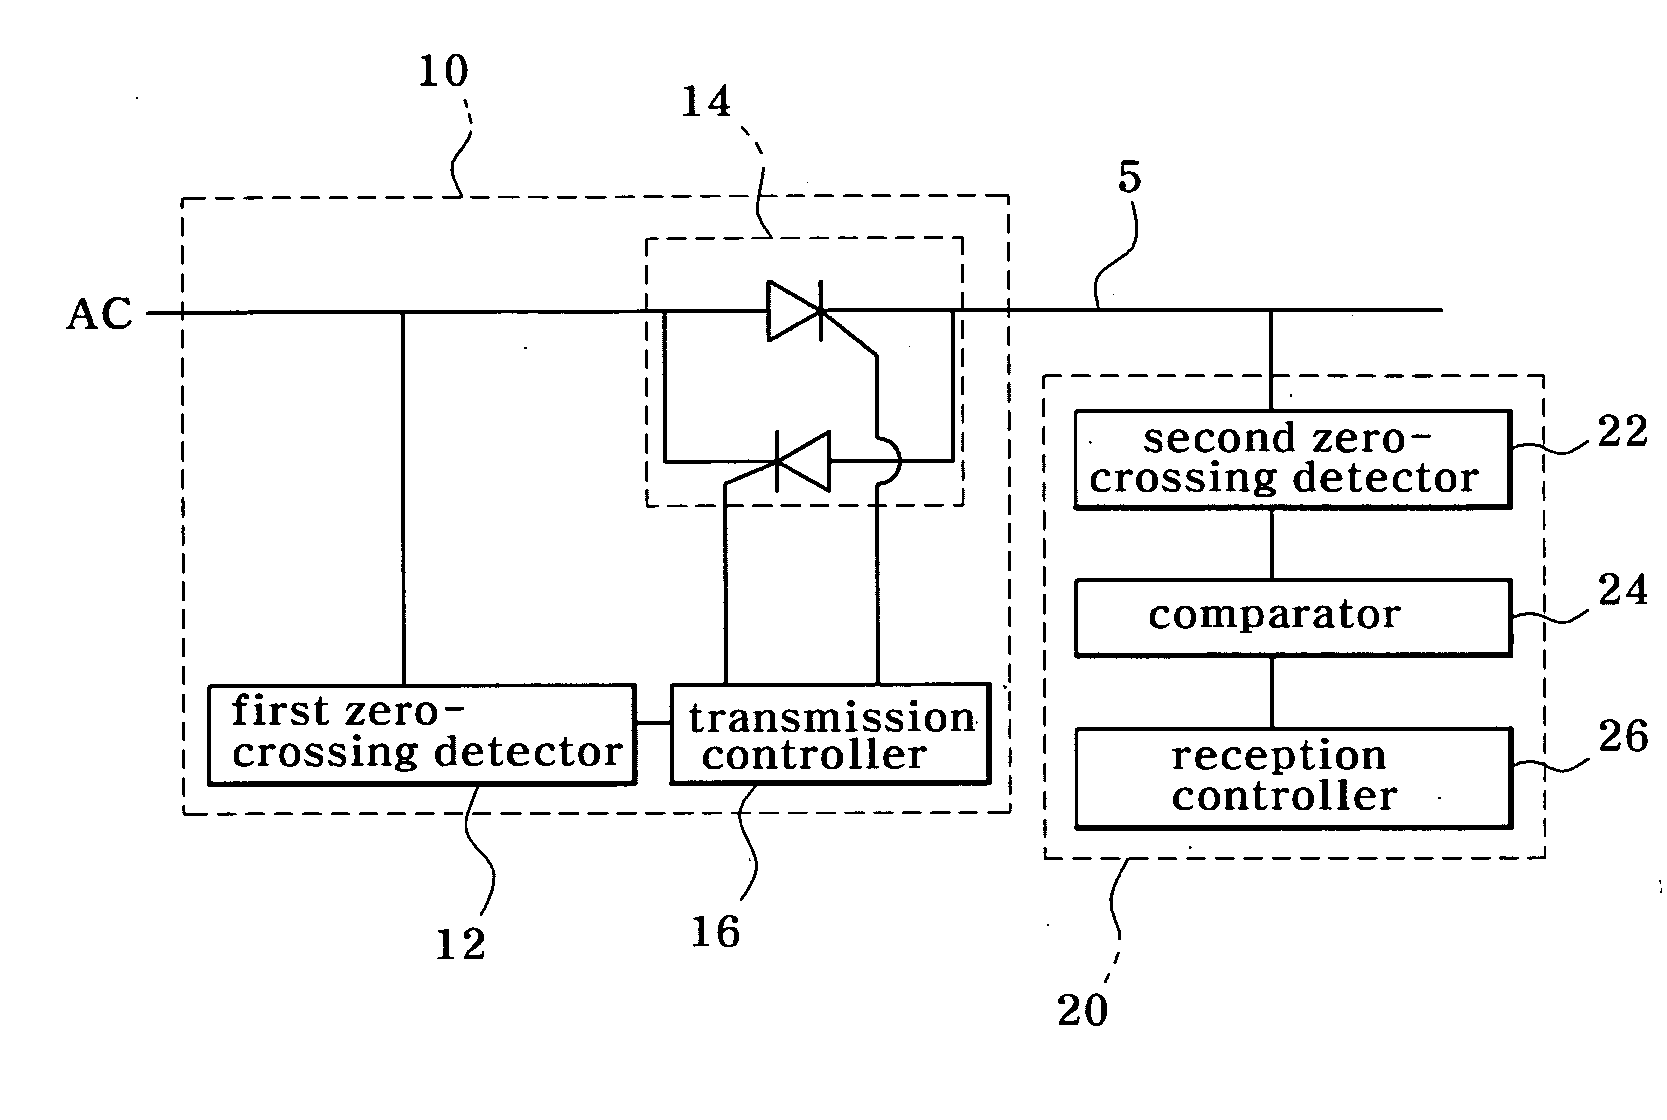 Power line communication apparatus, and method and apparatus for controlling electric devices